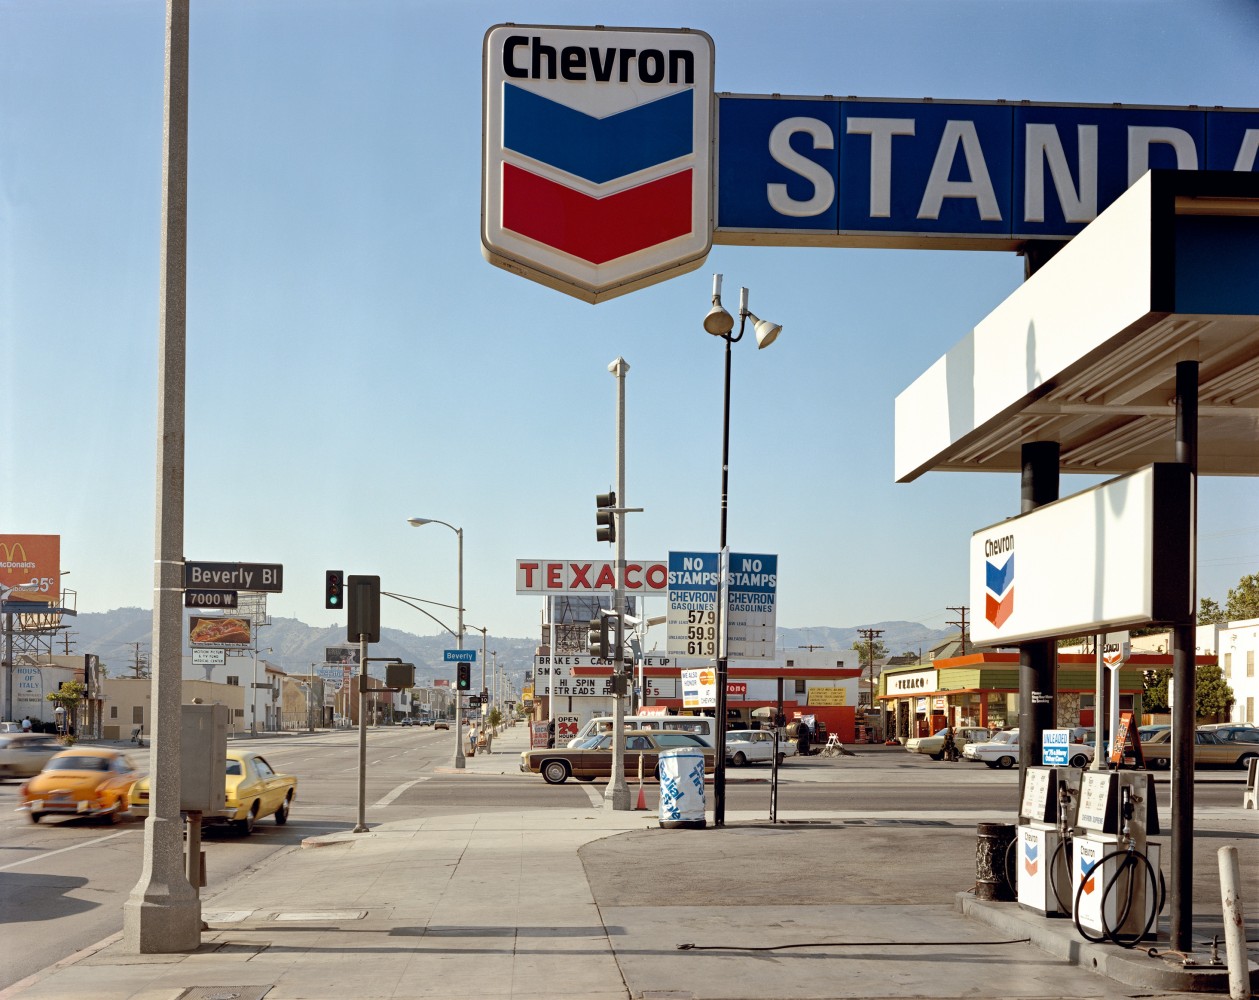 Stephen Shore

Beverly Boulevard and La Brea Avenue, Los Angeles, California, June 21, 1975

1975

Chromogenic color print

17 x 21 3/4 inches (43.2 x 55.2 cm) image size

20 x 24 inches (50.8 x 61 cm) paper size

Edition of 8

SS 210